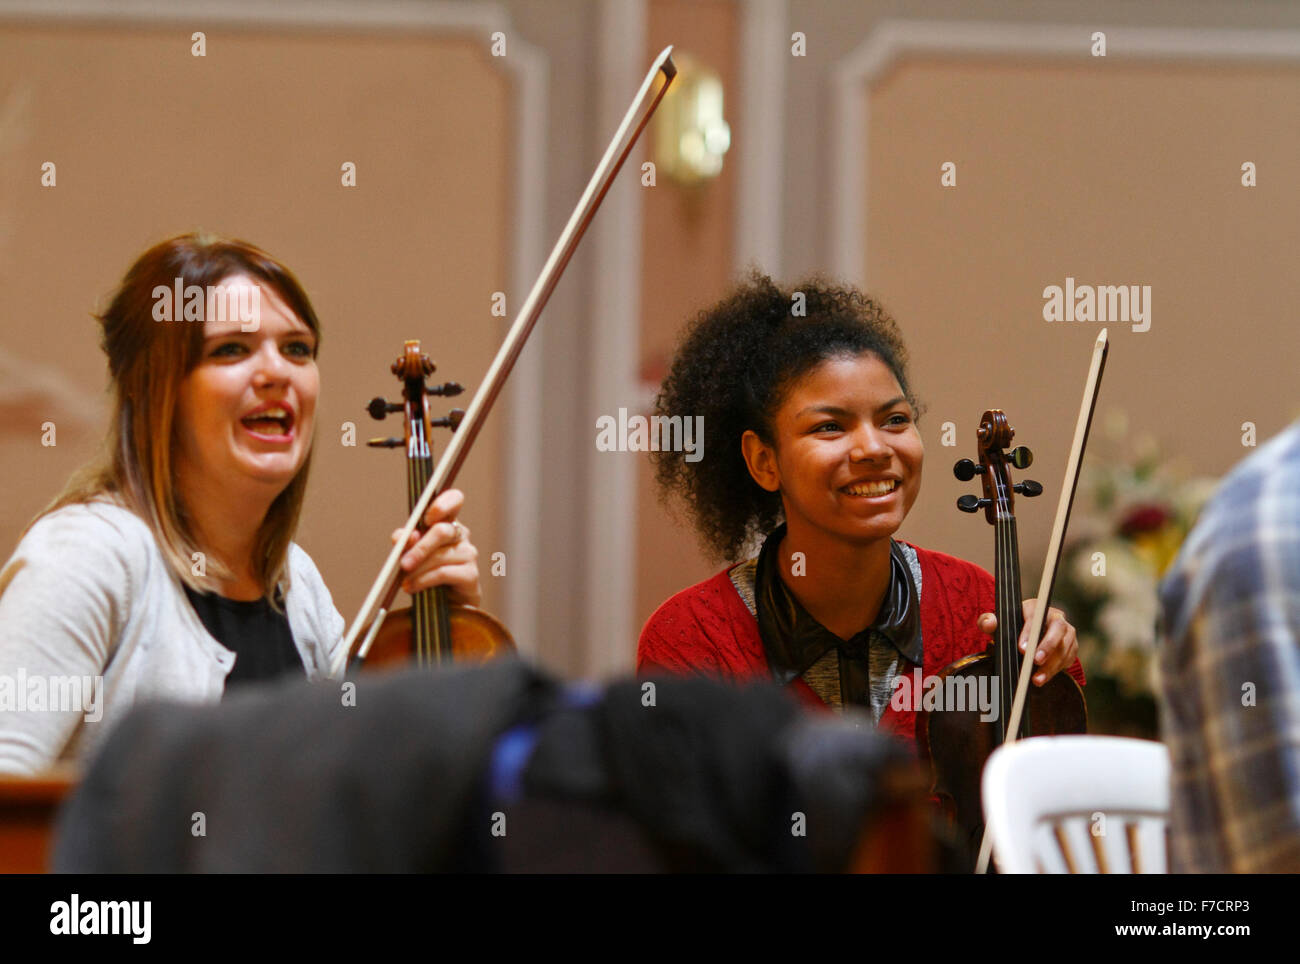 two young violinists laughing in rehearsals Stock Photo